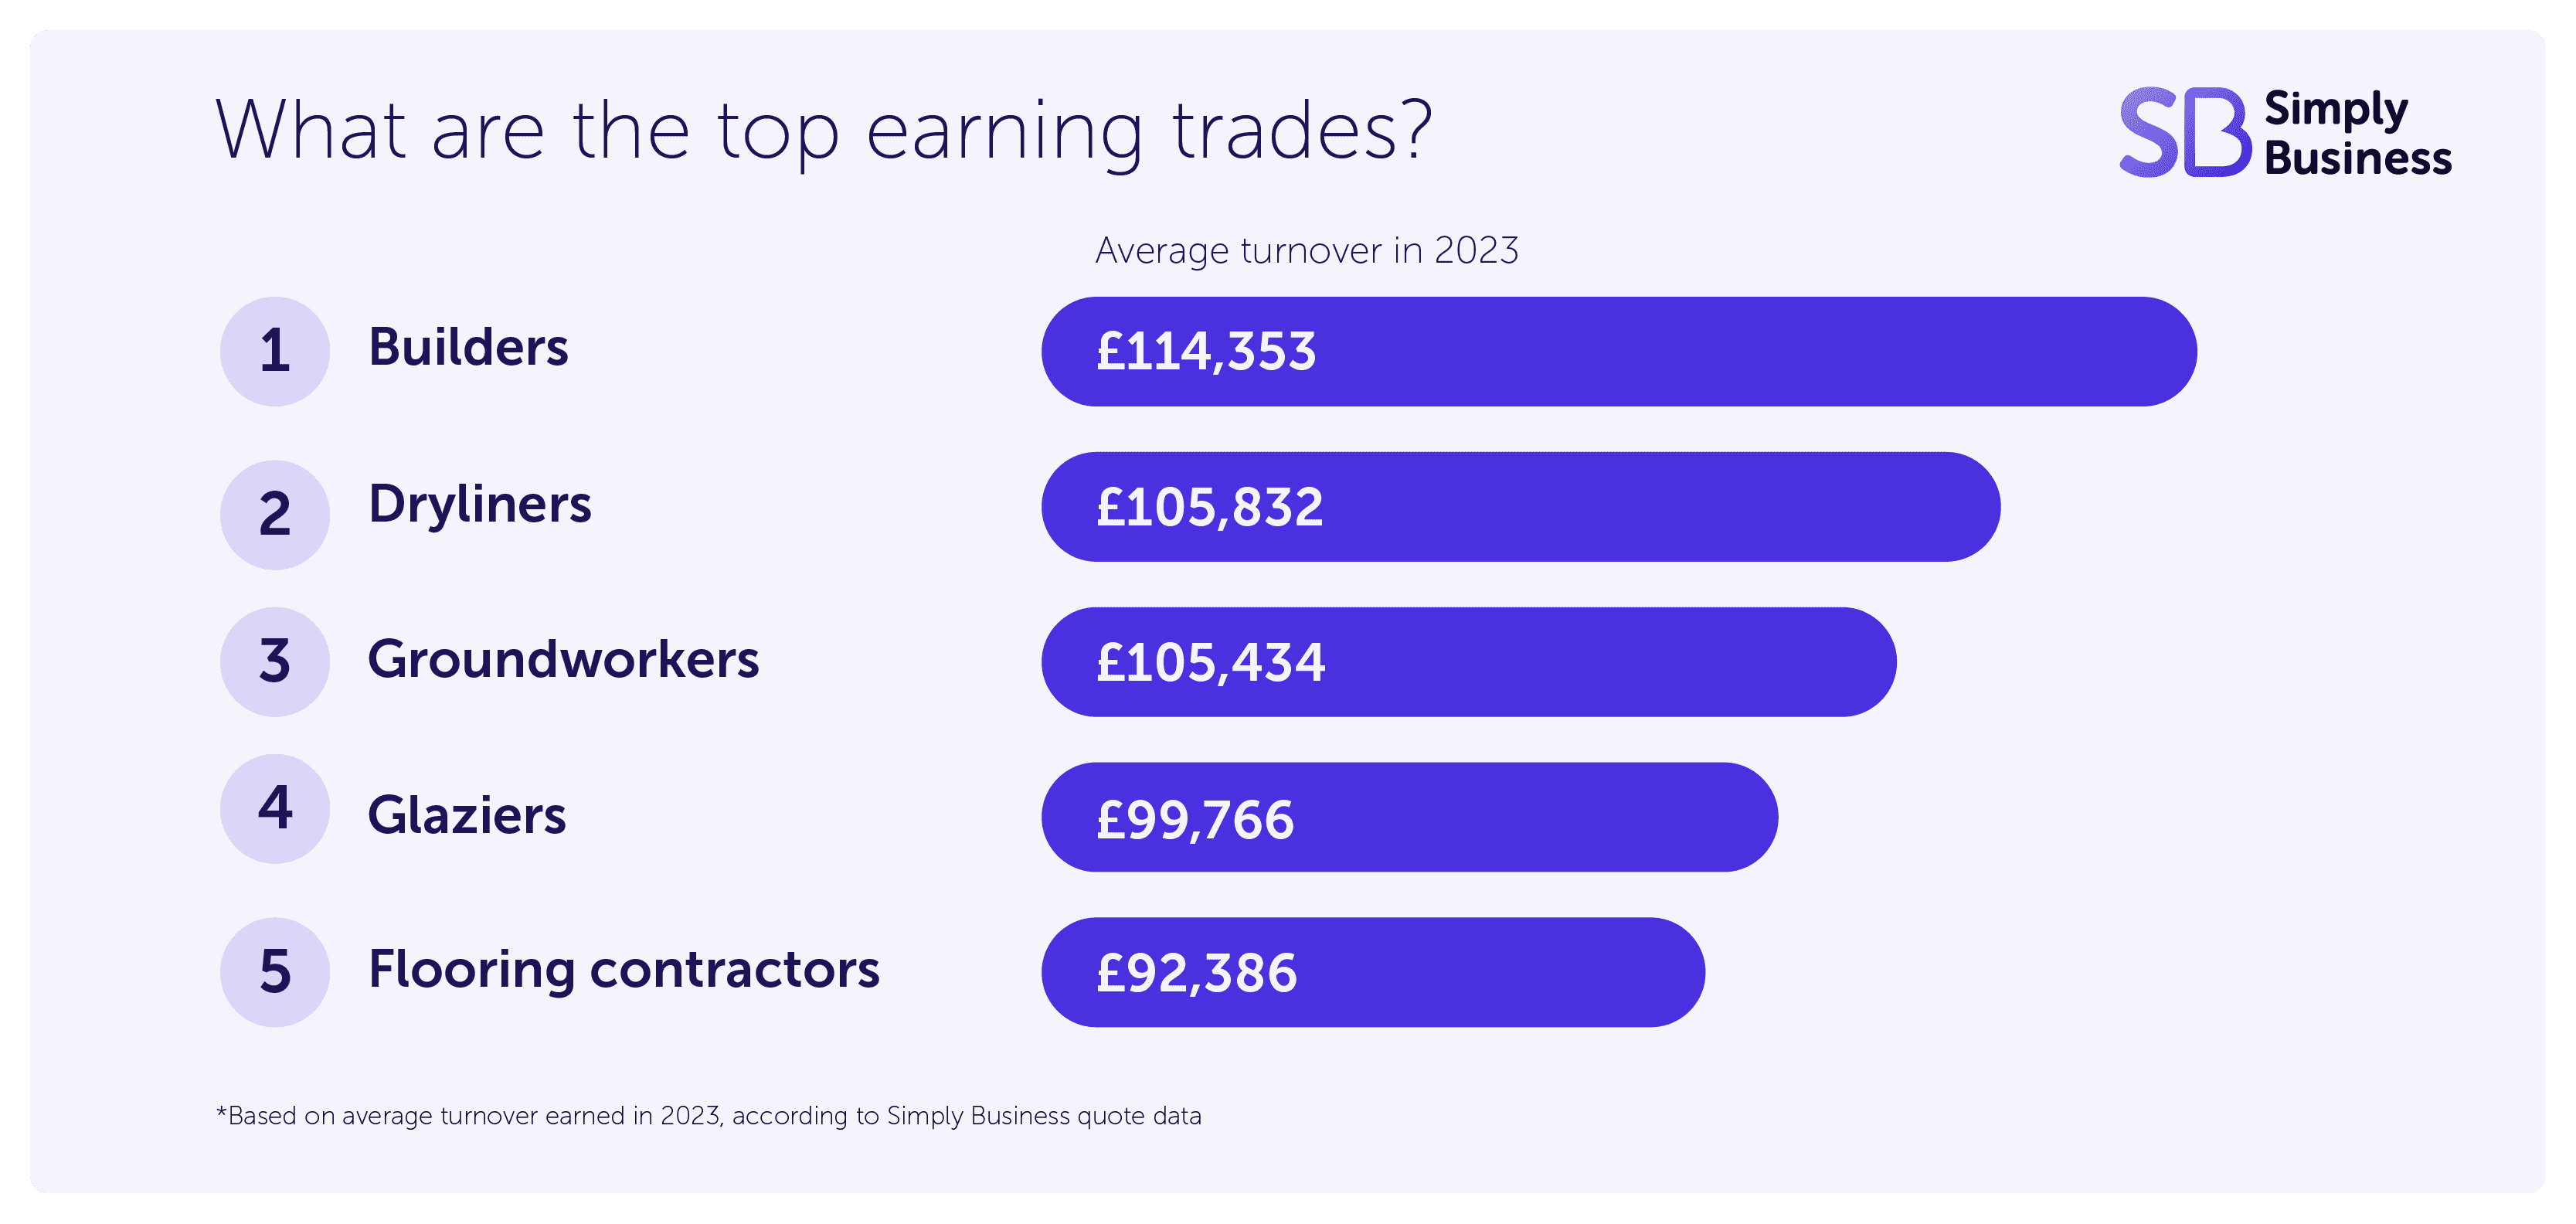 What are the top earning trades?